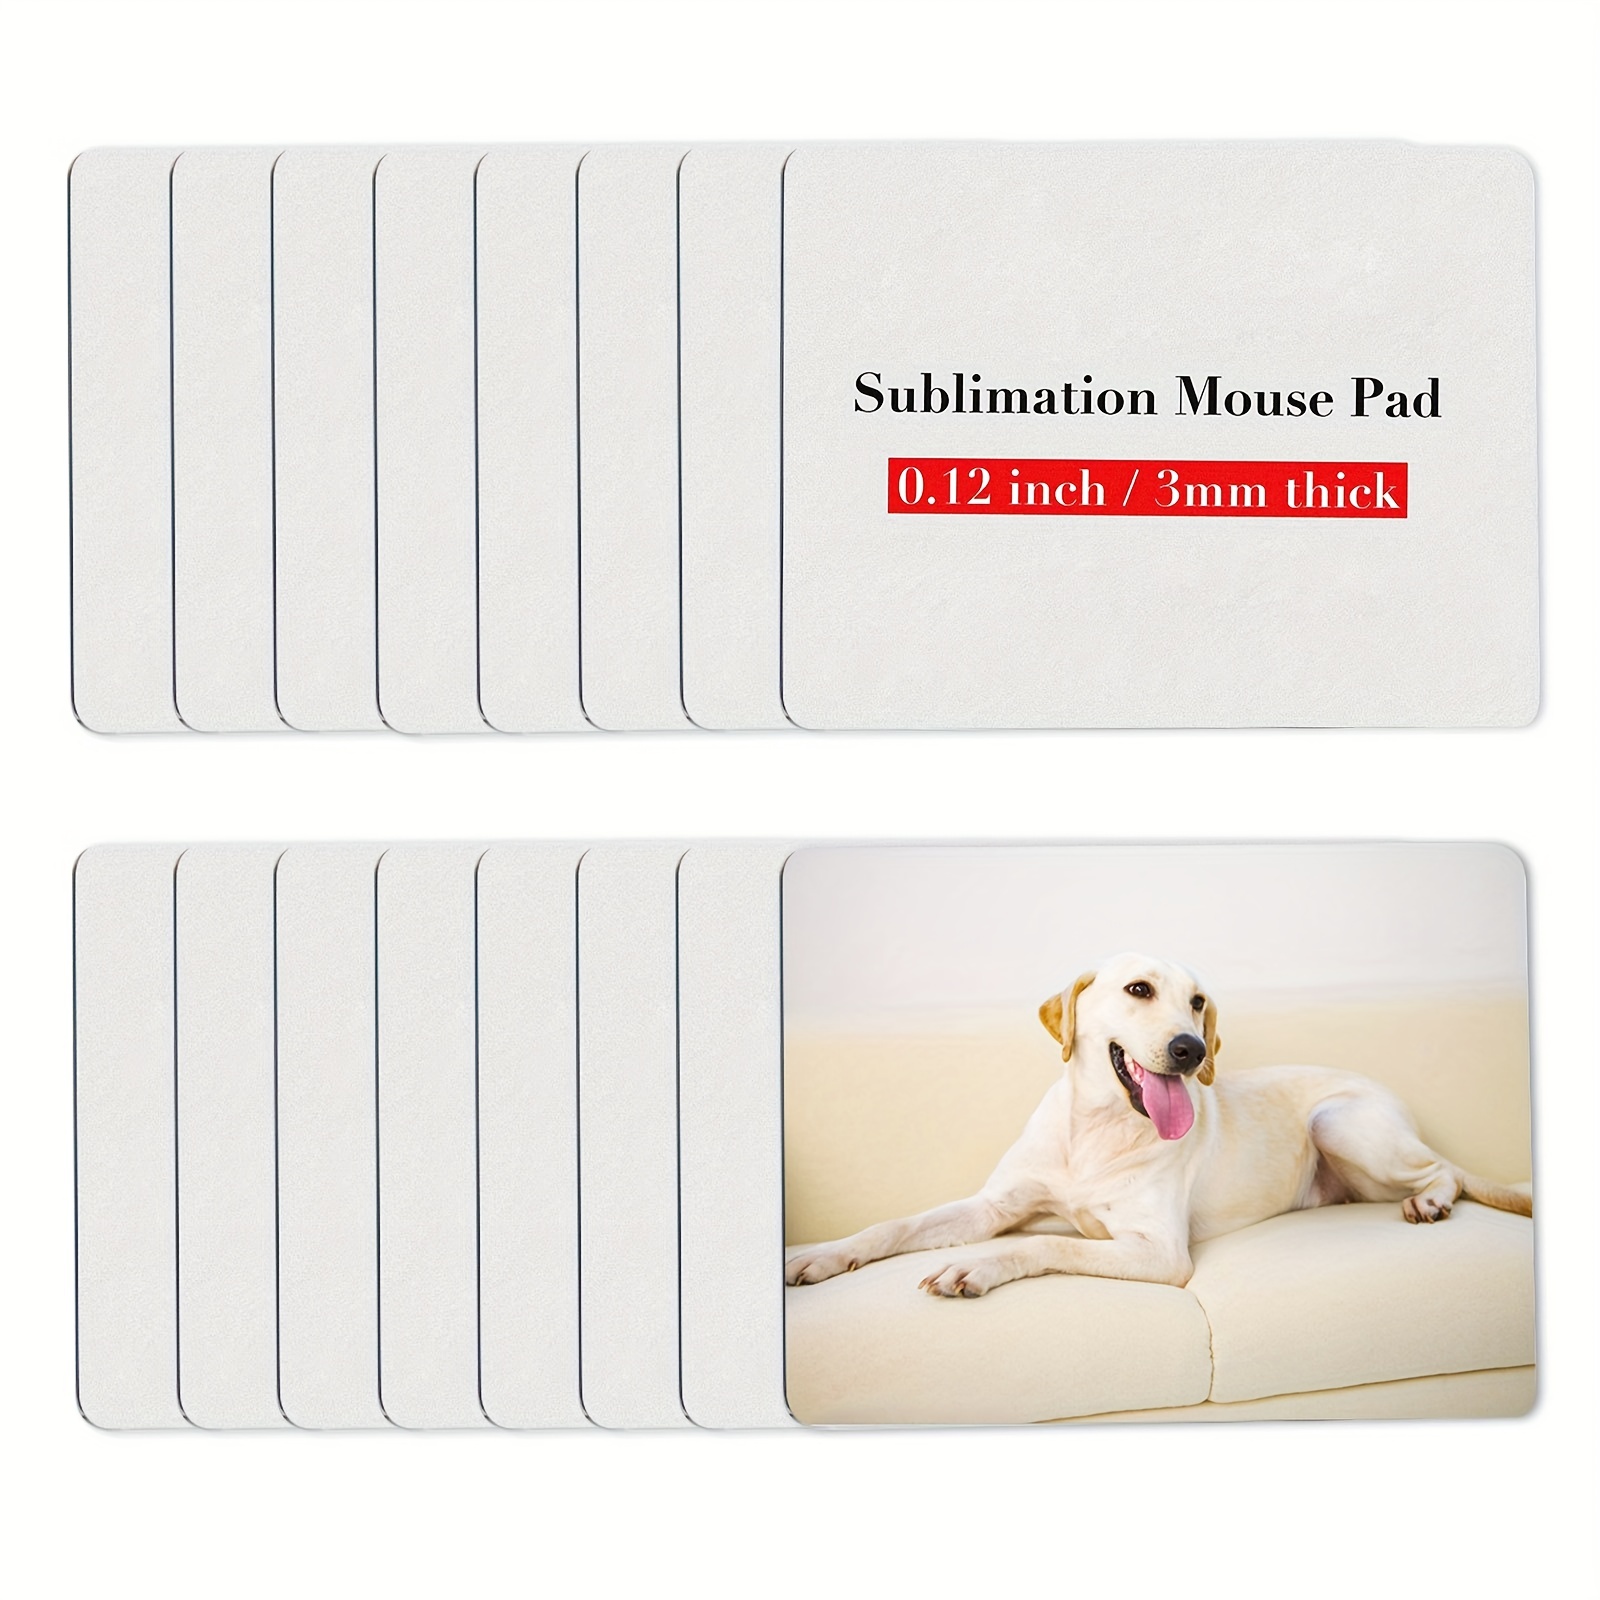 20Pcs Blank Mouse Pad for Sublimation Transfer Heat Press Printing Crafts